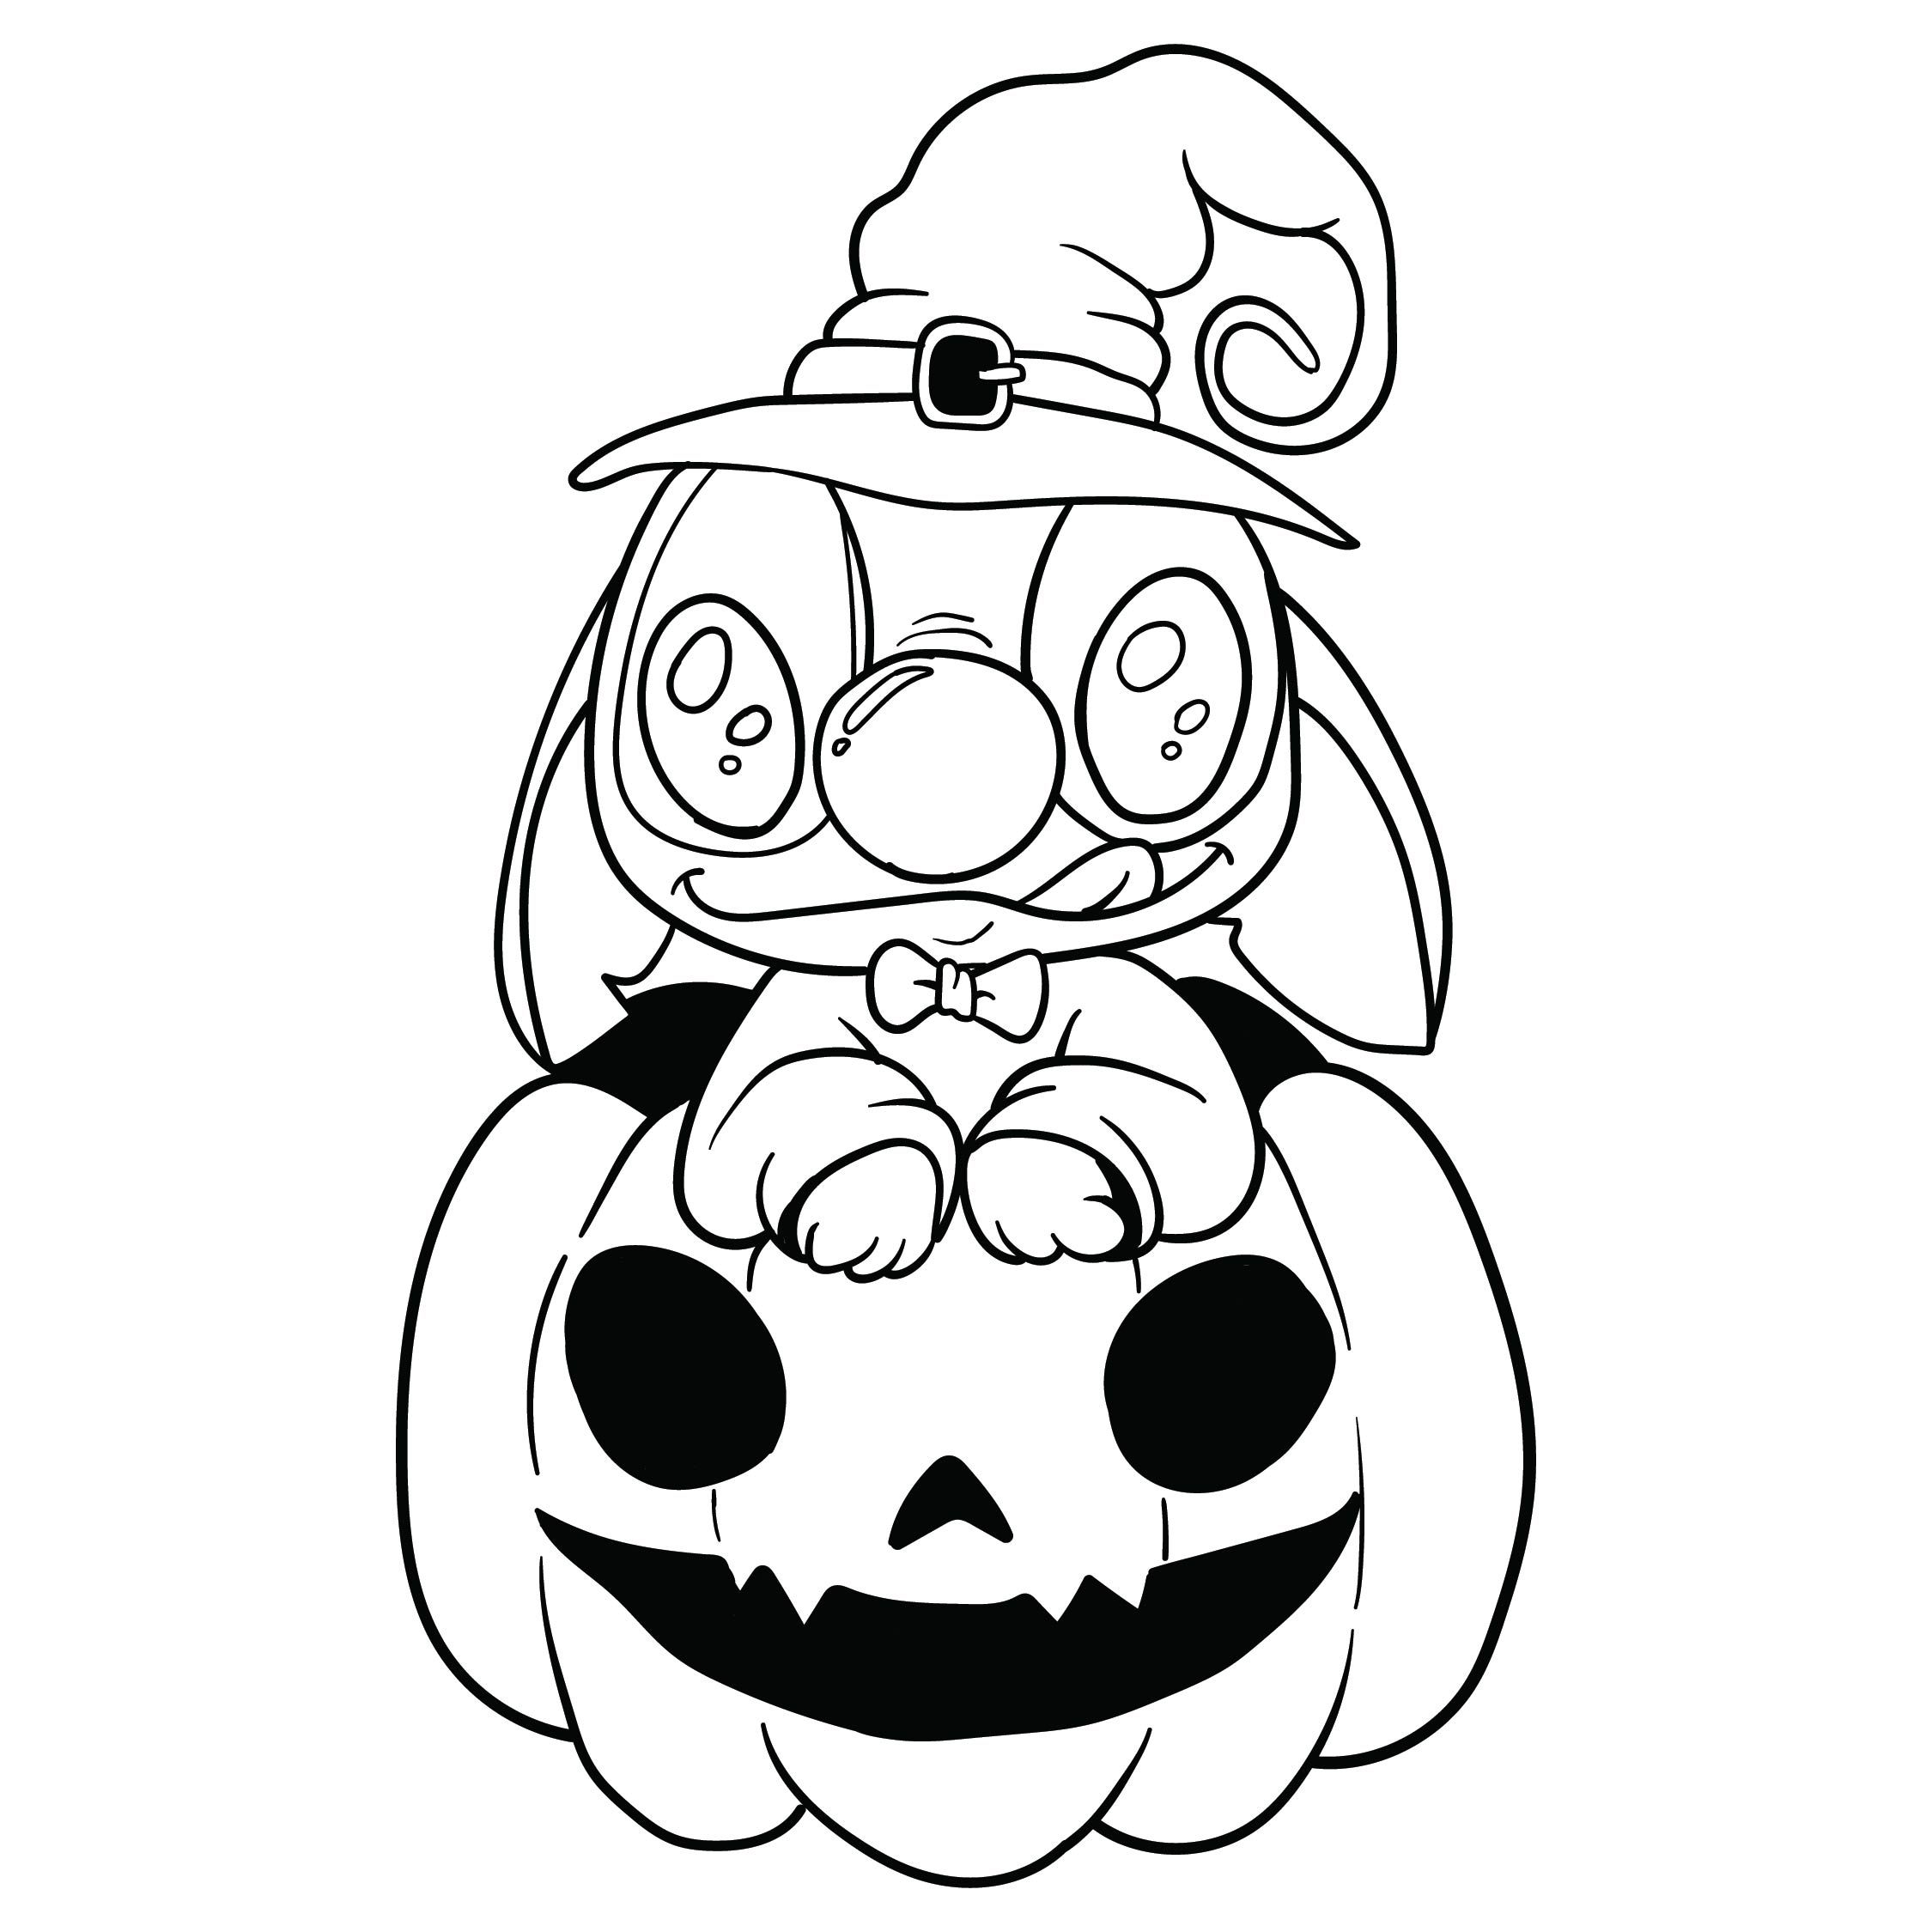 Best disney halloween coloring pages printable pdf for free at printablee stitch coloring pages pumpkin coloring pages halloween coloring pages printable